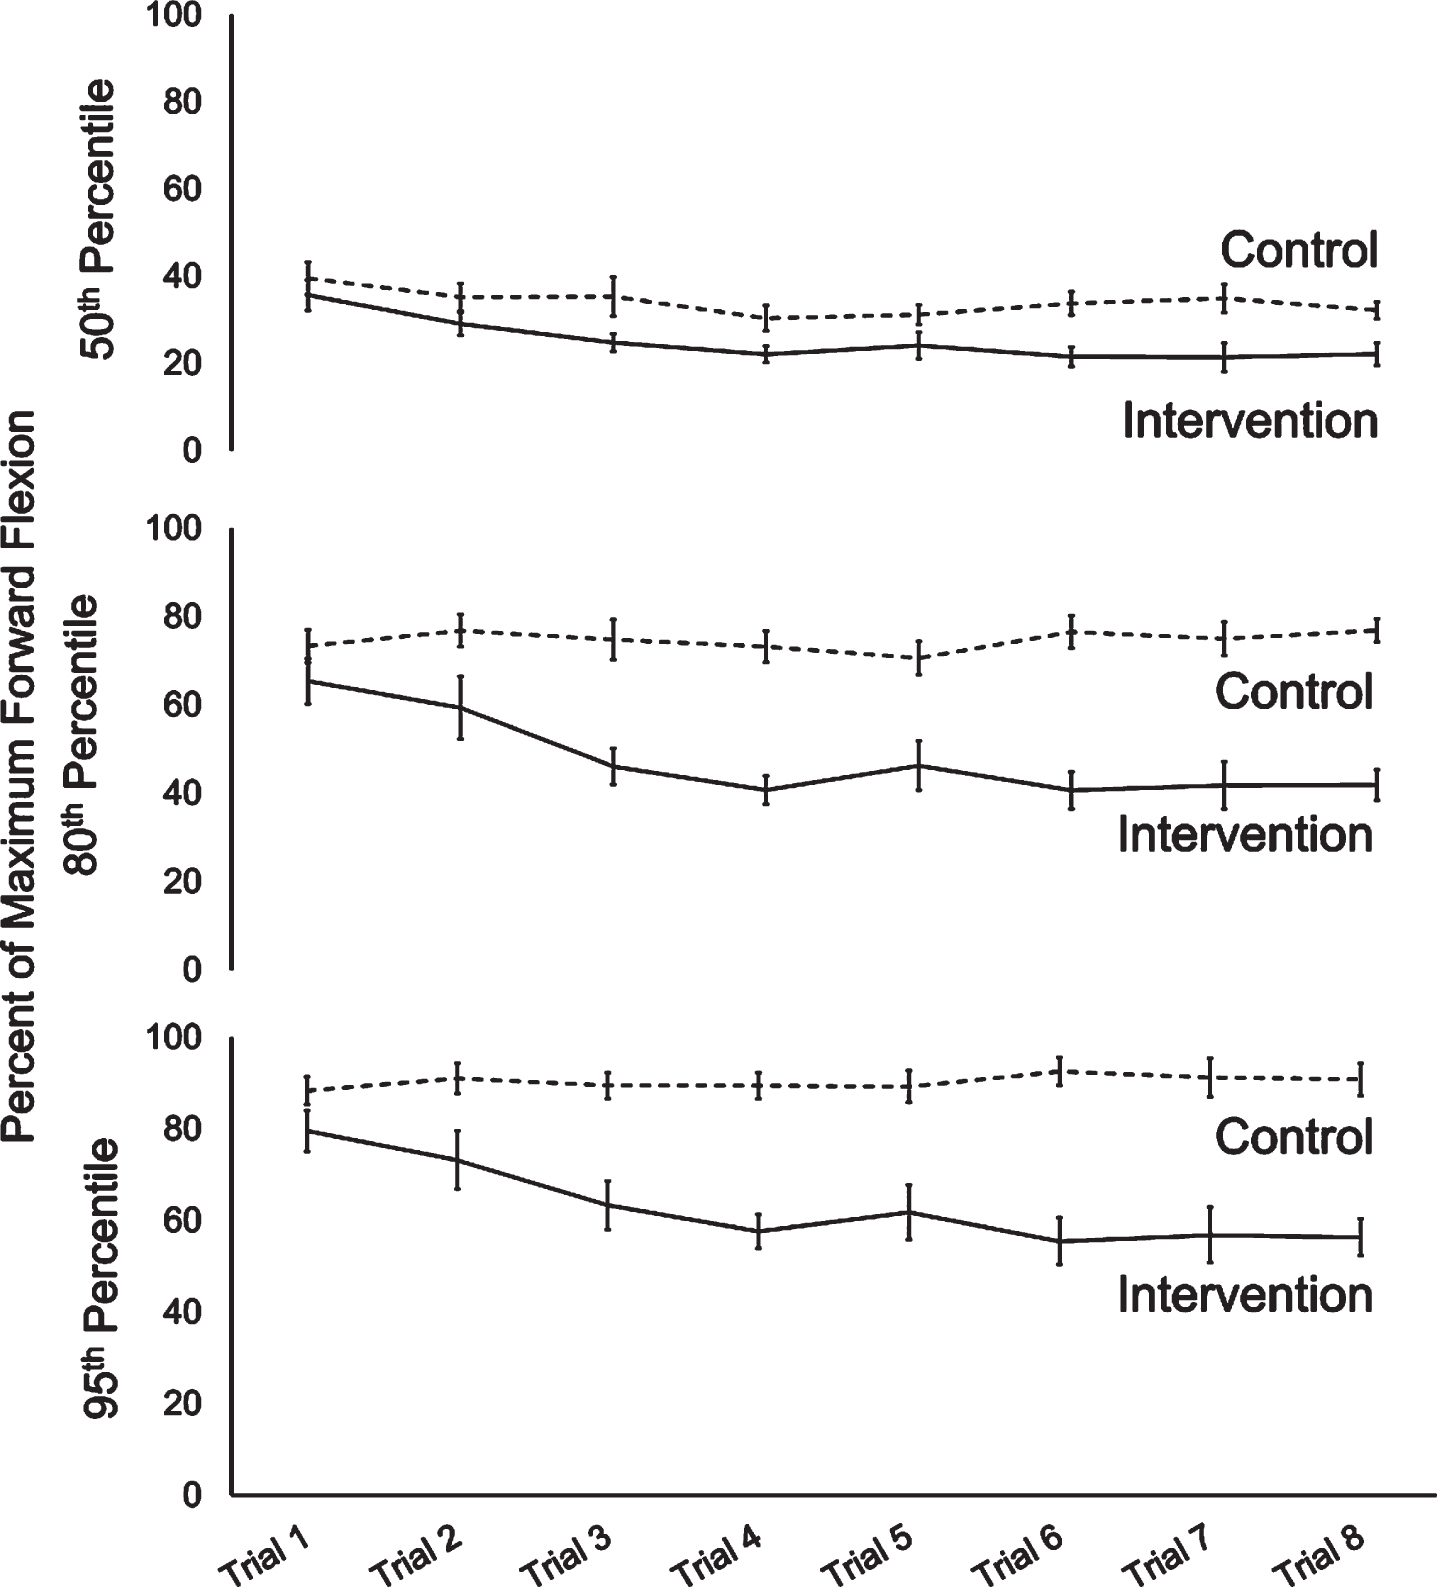 50th, 80th and 95th percentile of forward flexion/maximum flexion across trials in intervention and control groups. Error bars show standard error.